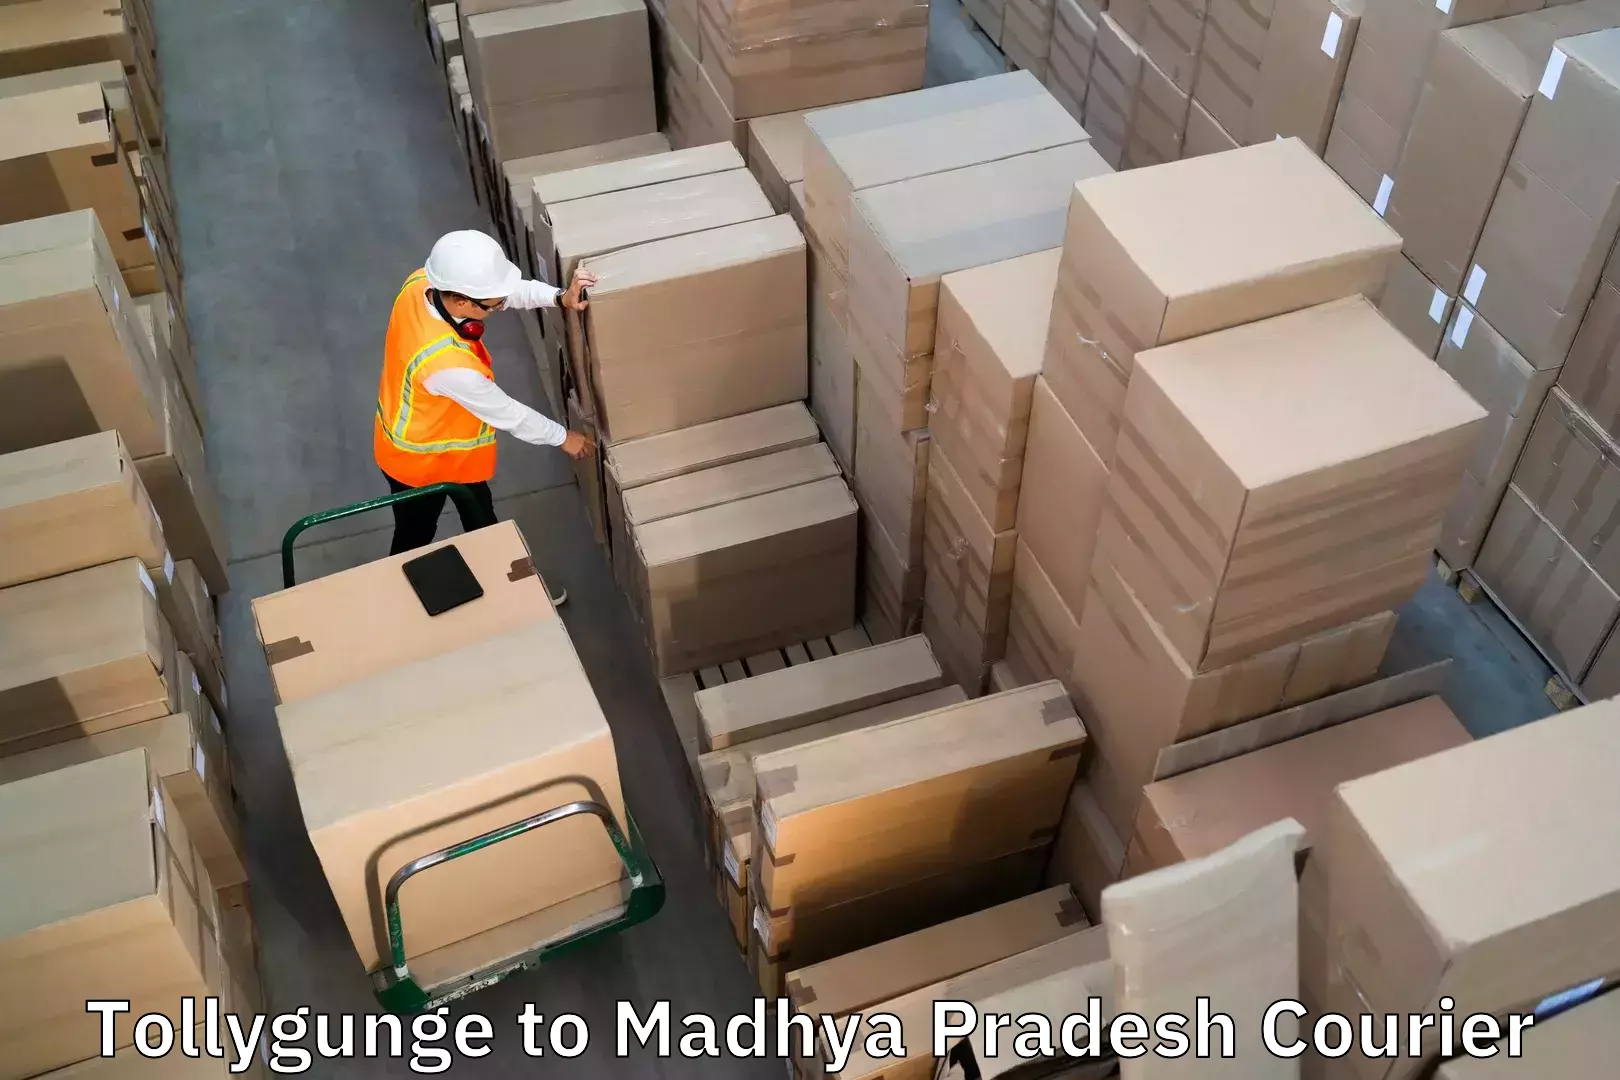 Luggage delivery network Tollygunge to IIT Indore